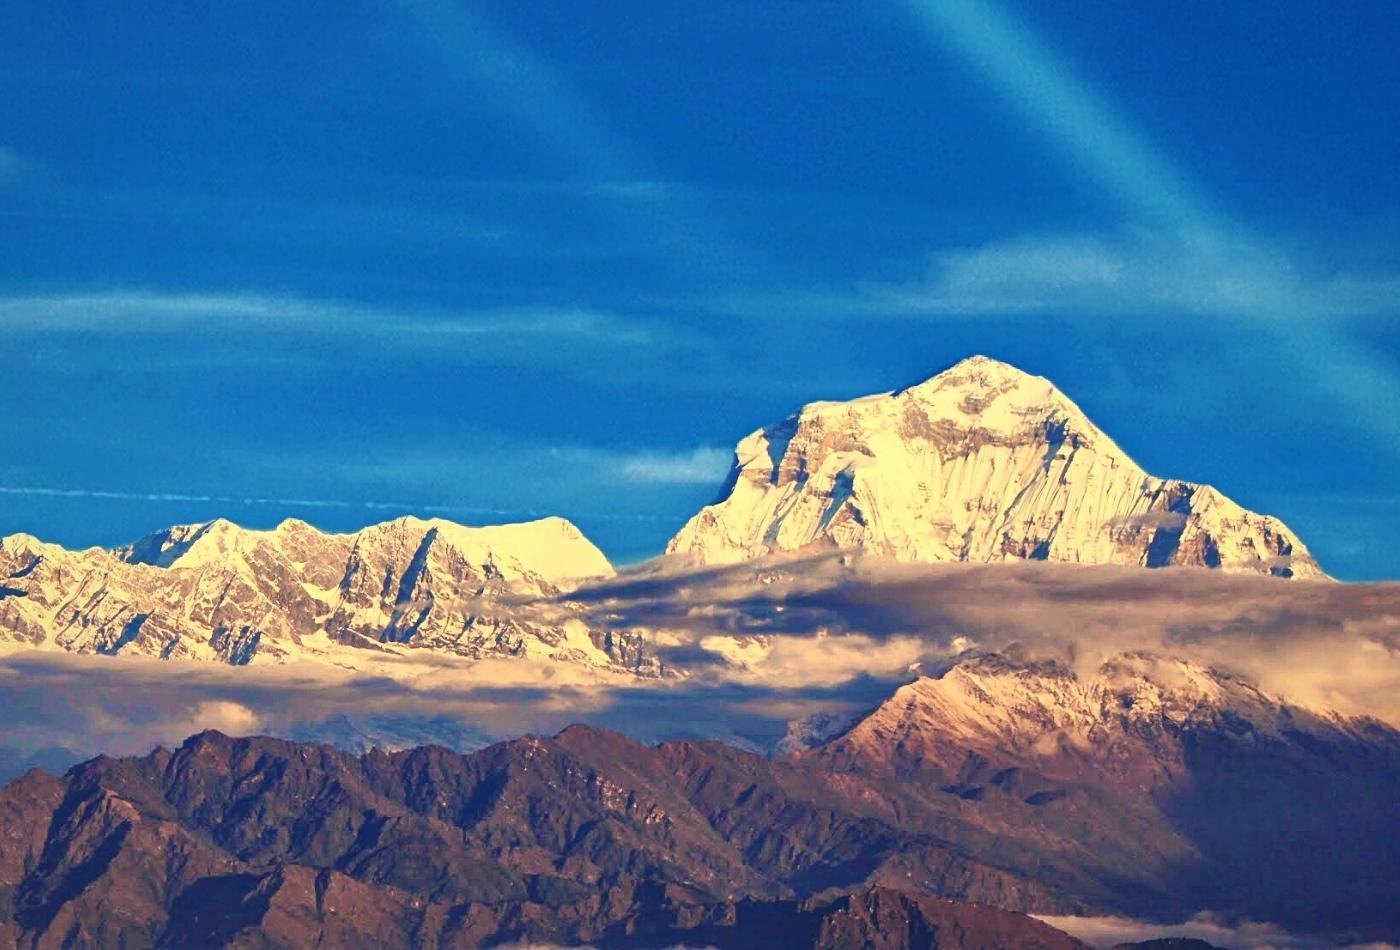 A beautiful sunrise view of the majestic Mt. Dhaulagiri, with scattered clouds adding to the natural beauty of the scene from Poon Hill.